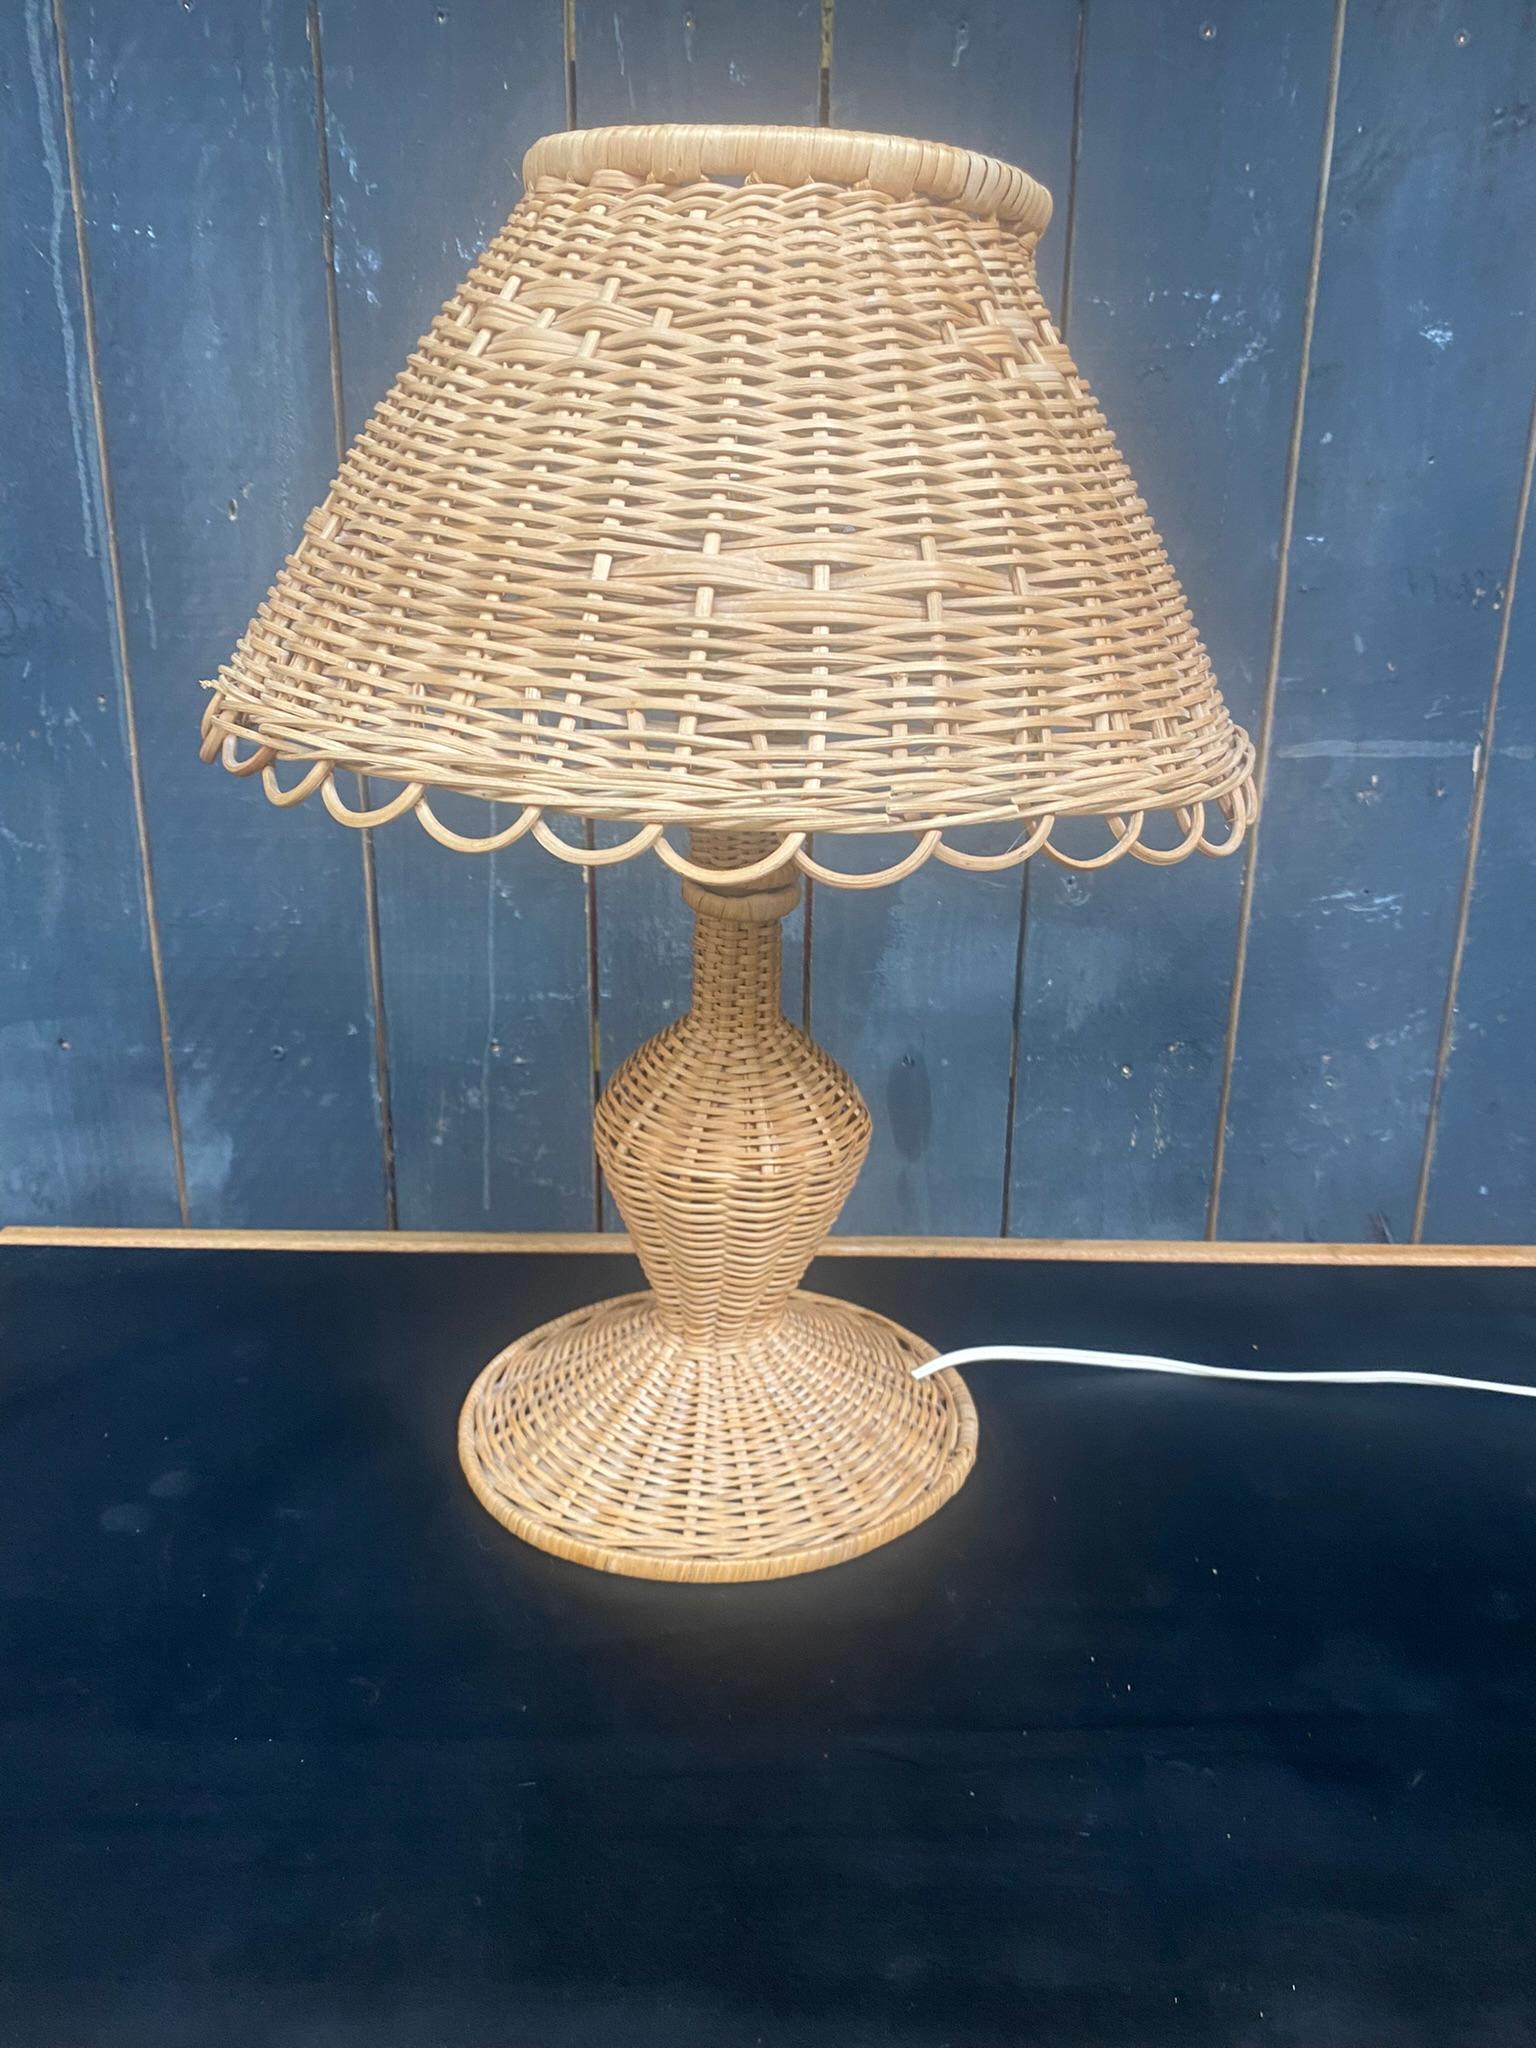 Mid-20th Century Rattan and Bamboo Lamp, circa 1950-1960 For Sale